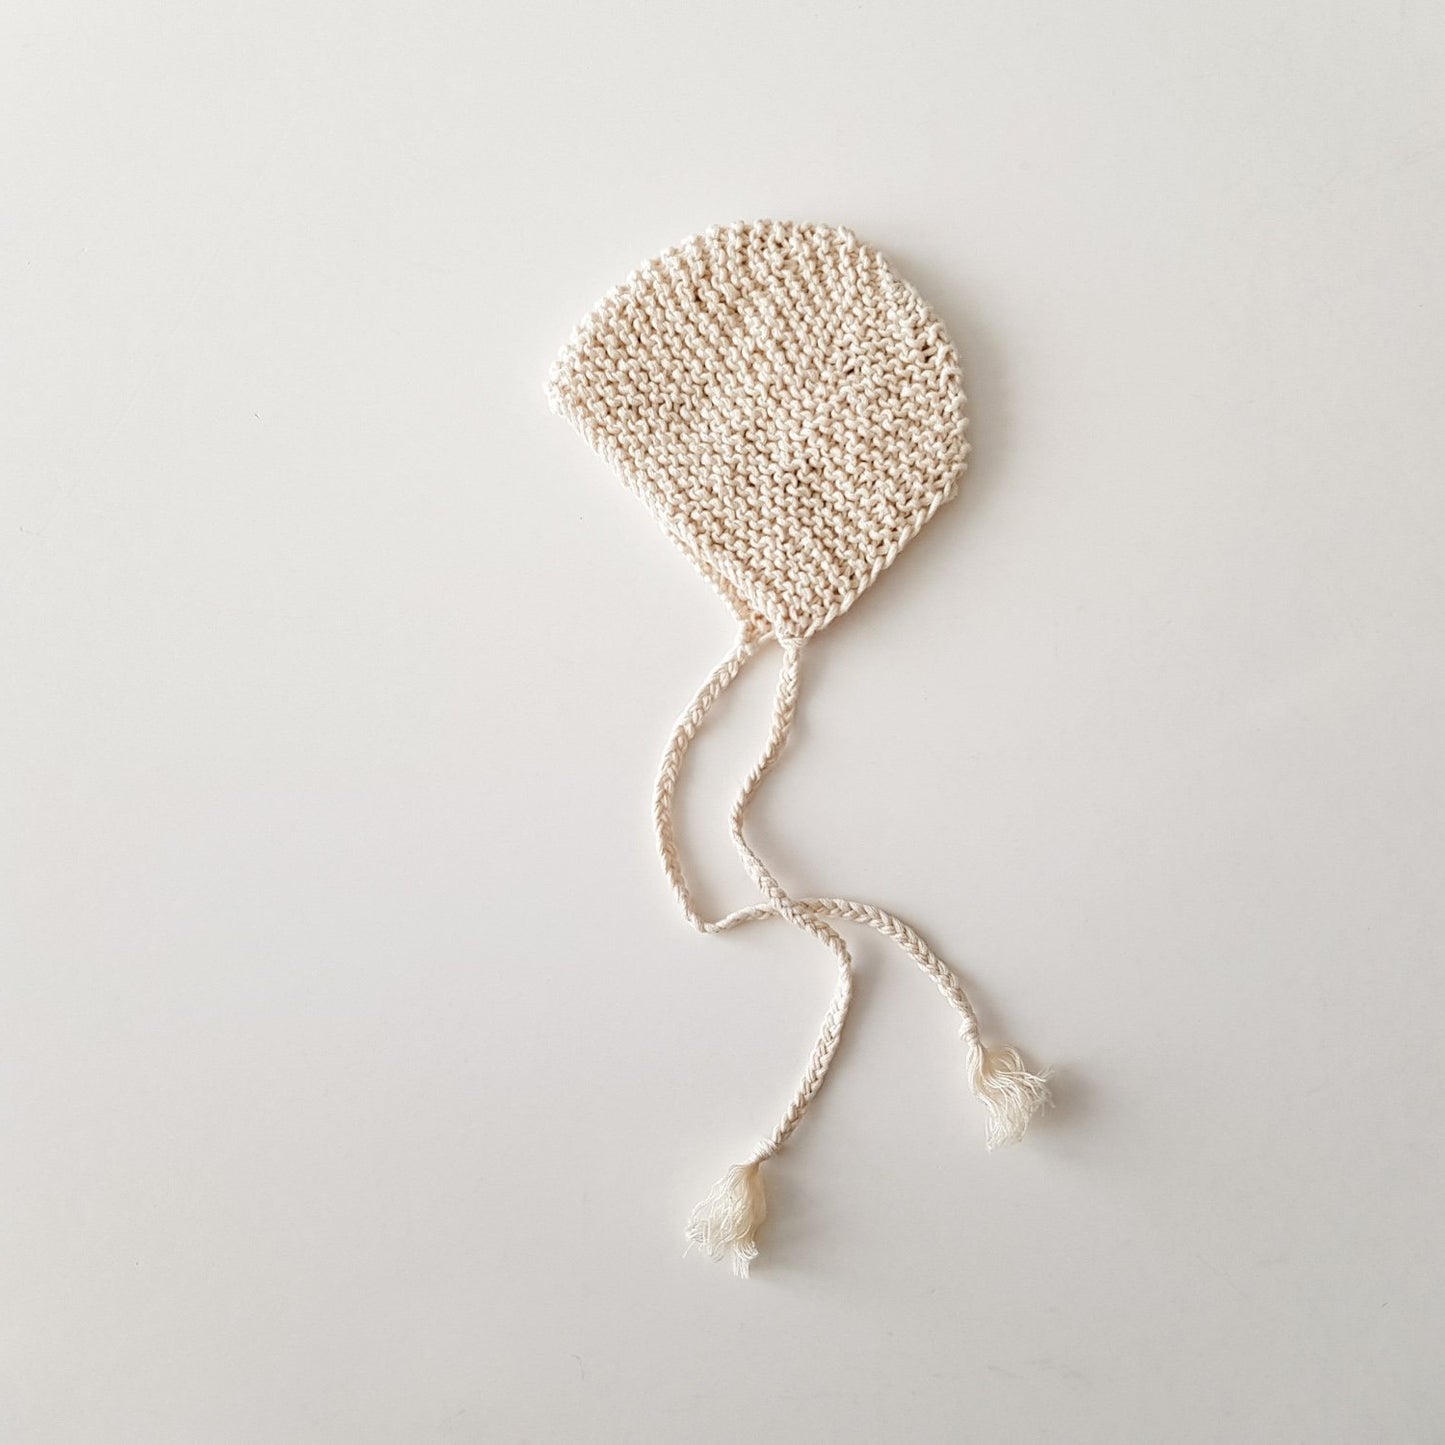 Knitted bonnet for baby doll, natural white